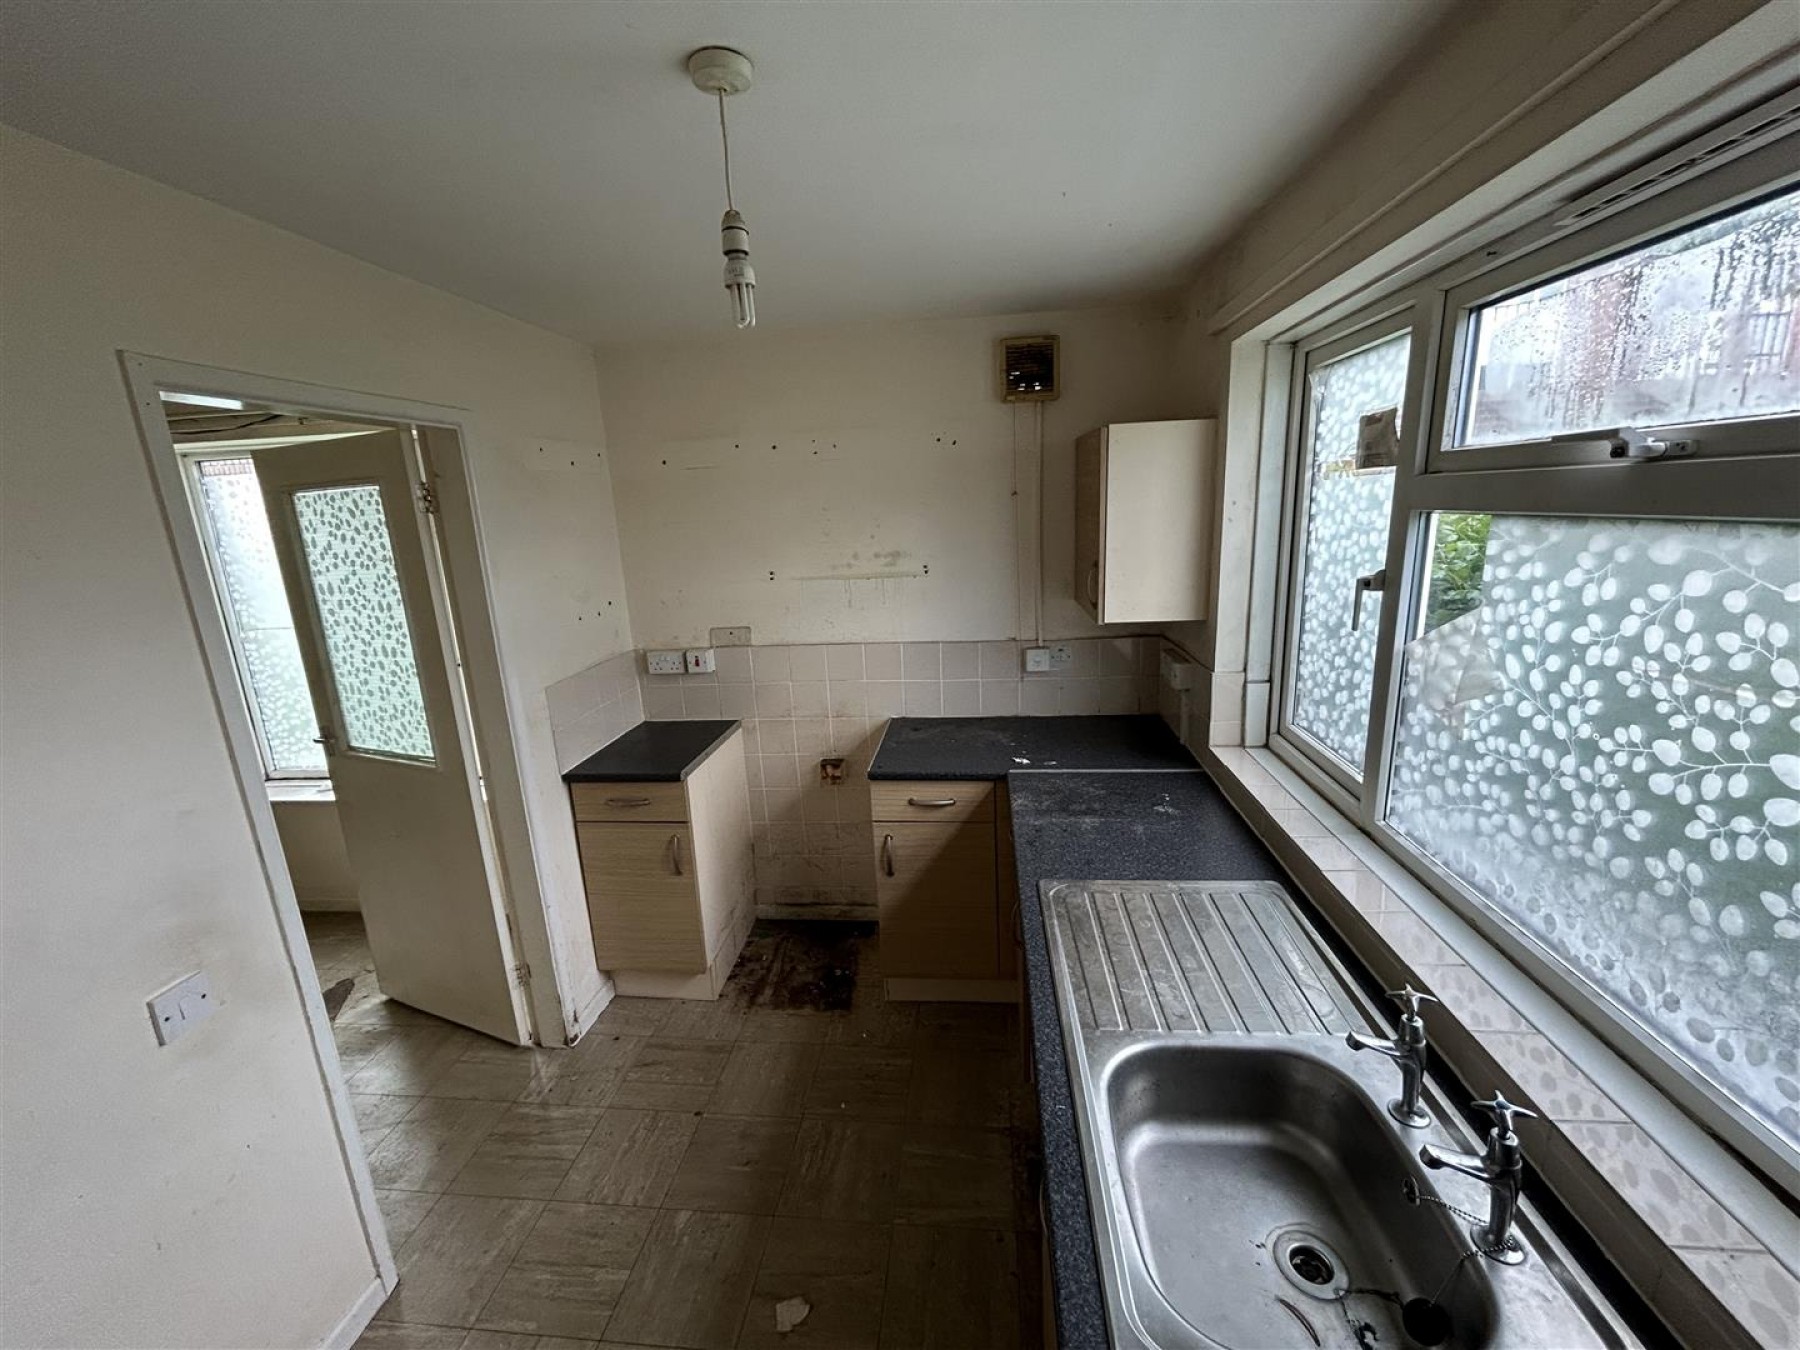 Images for GROUND FLOOR FLAT | STOCKWOOD